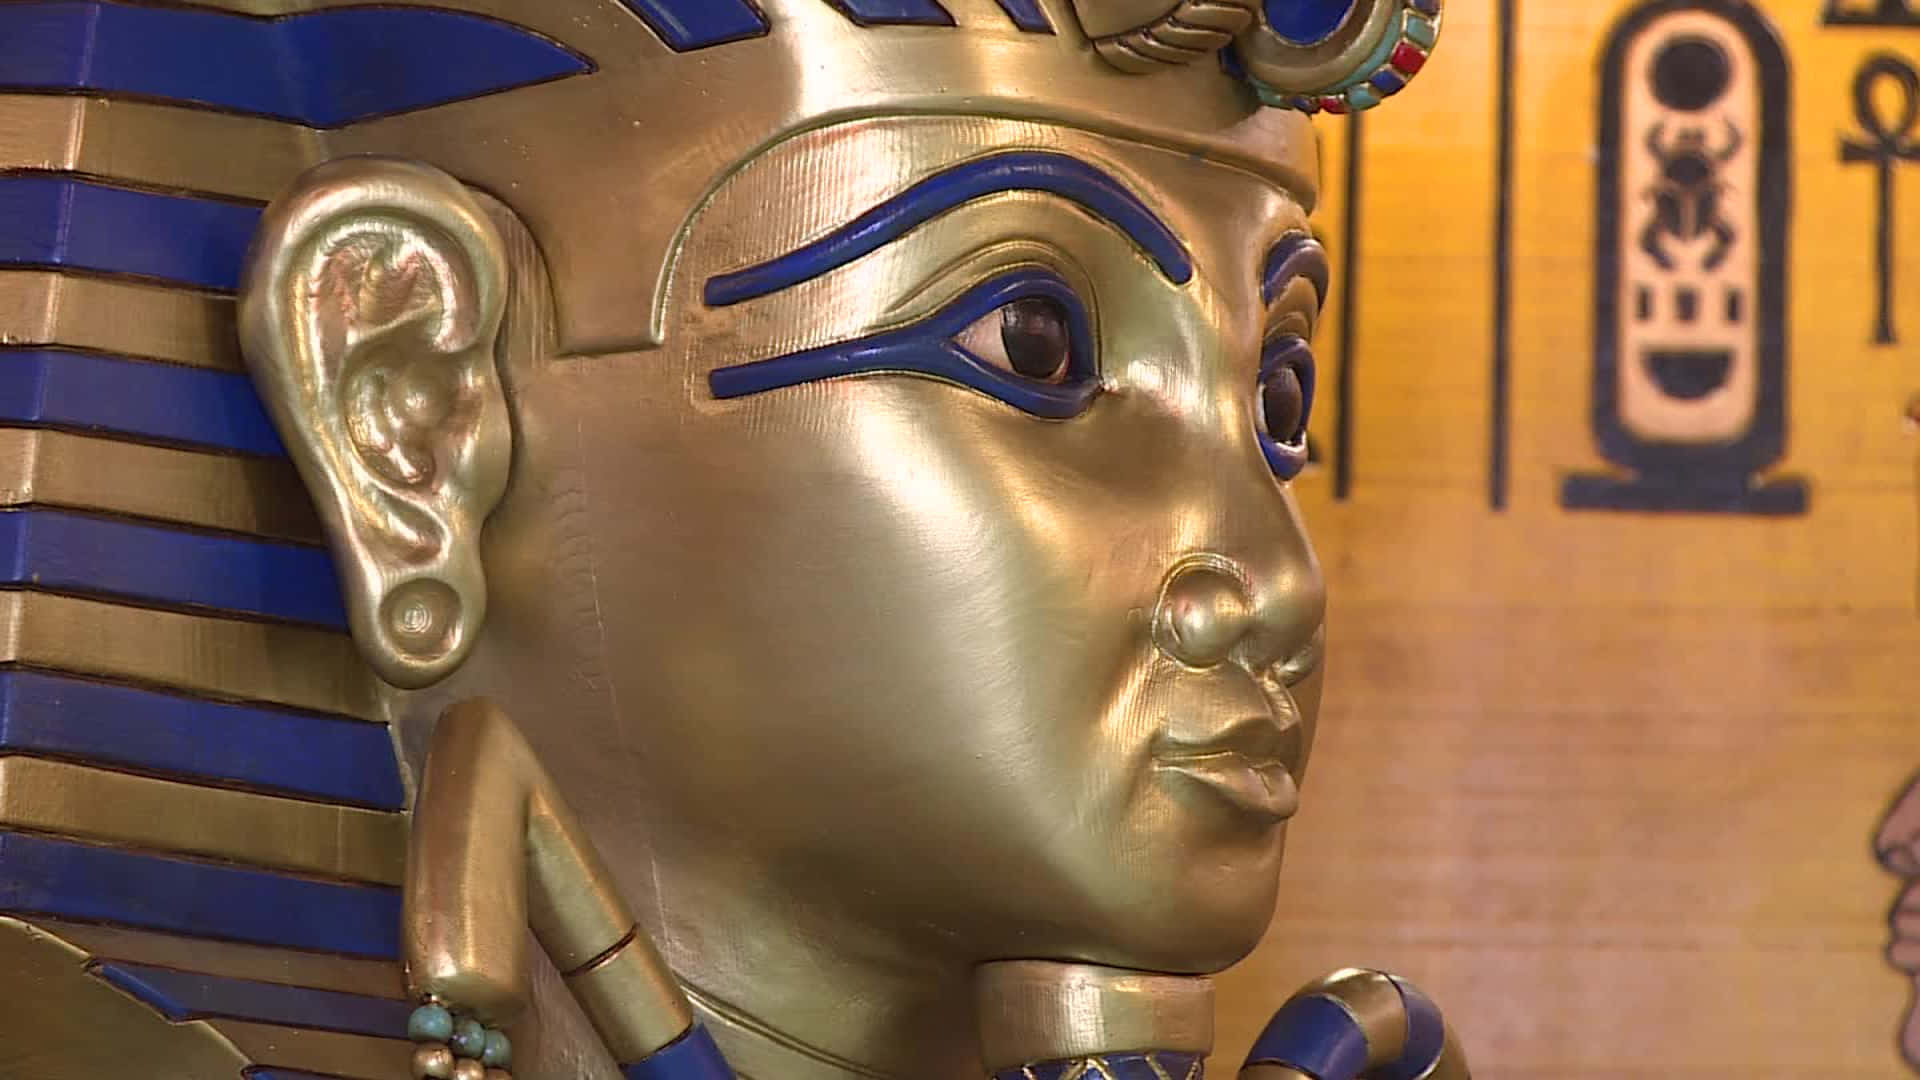 A Statue Of An Egyptian Pharaoh With Gold And Blue Eyes Background